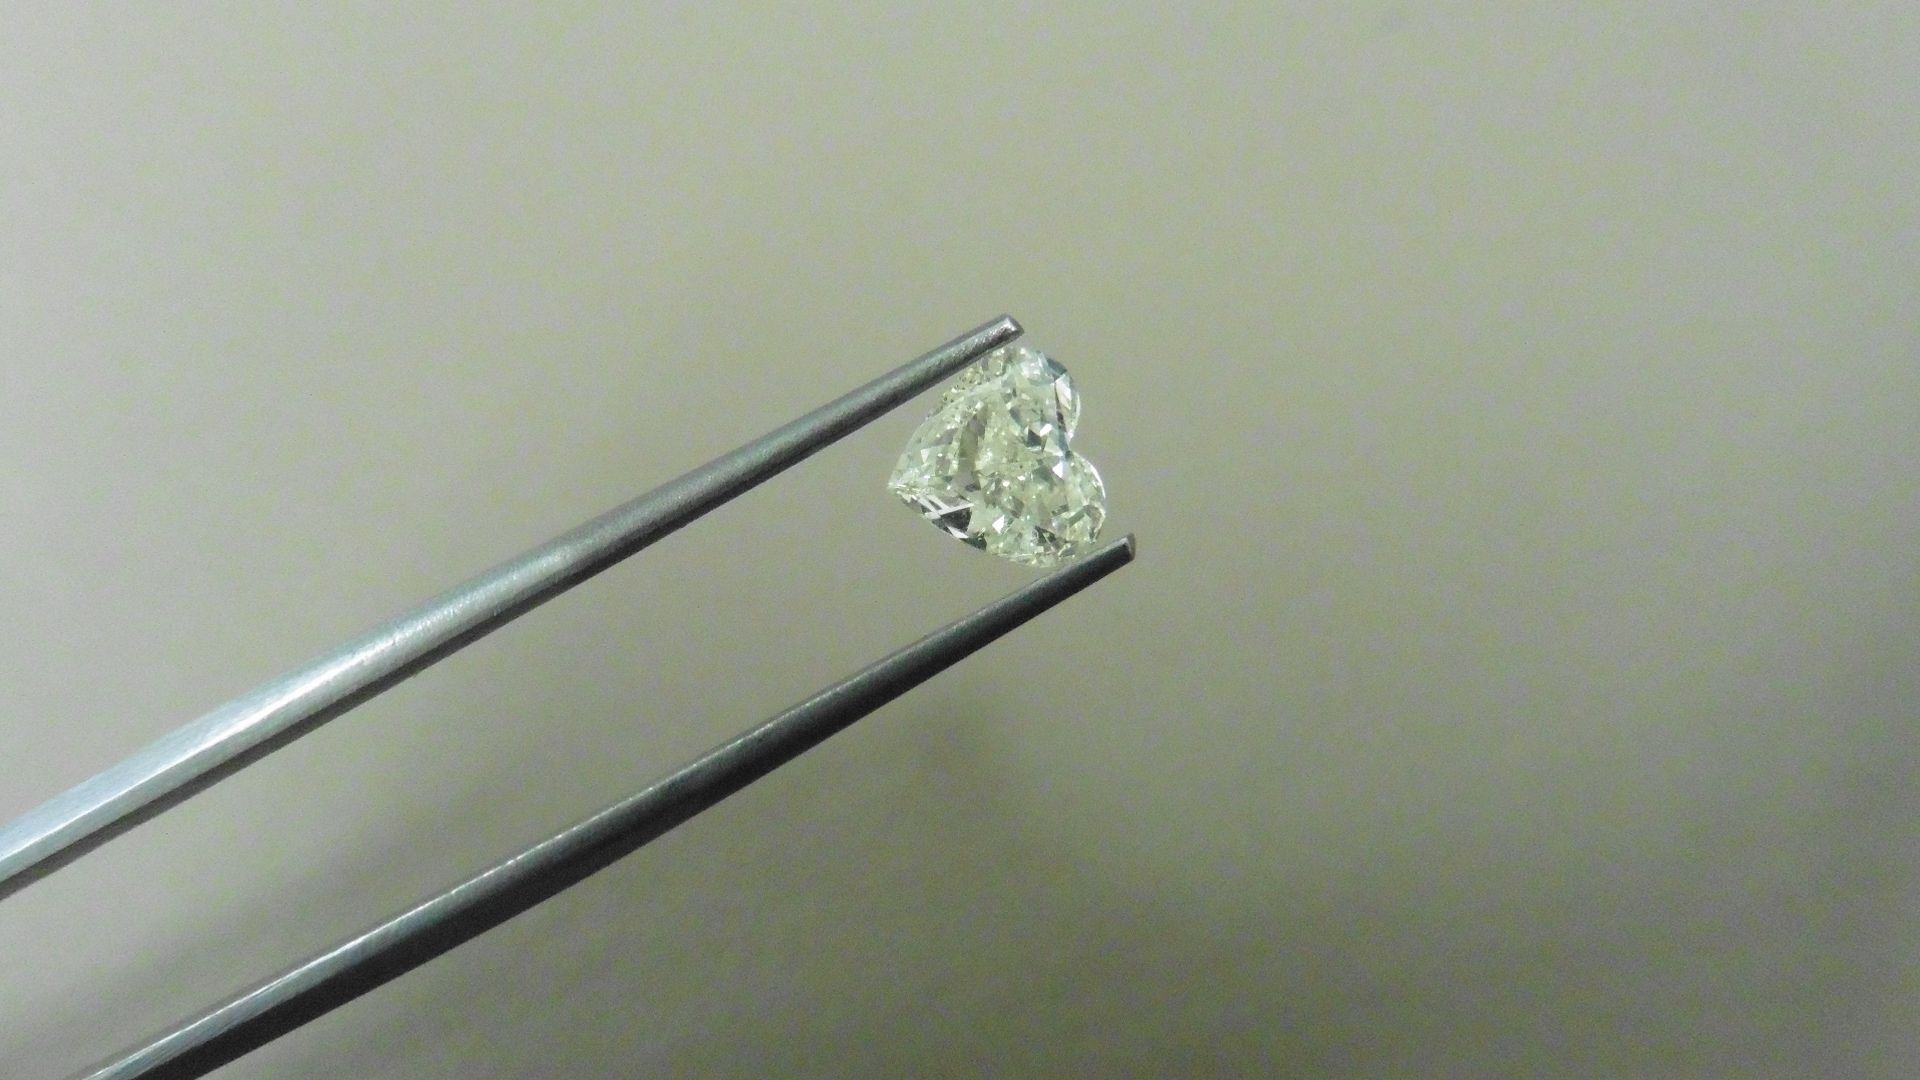 0.91ct heart shaped diamond, loose stone.J colour and Si clarity. No certification but can be done